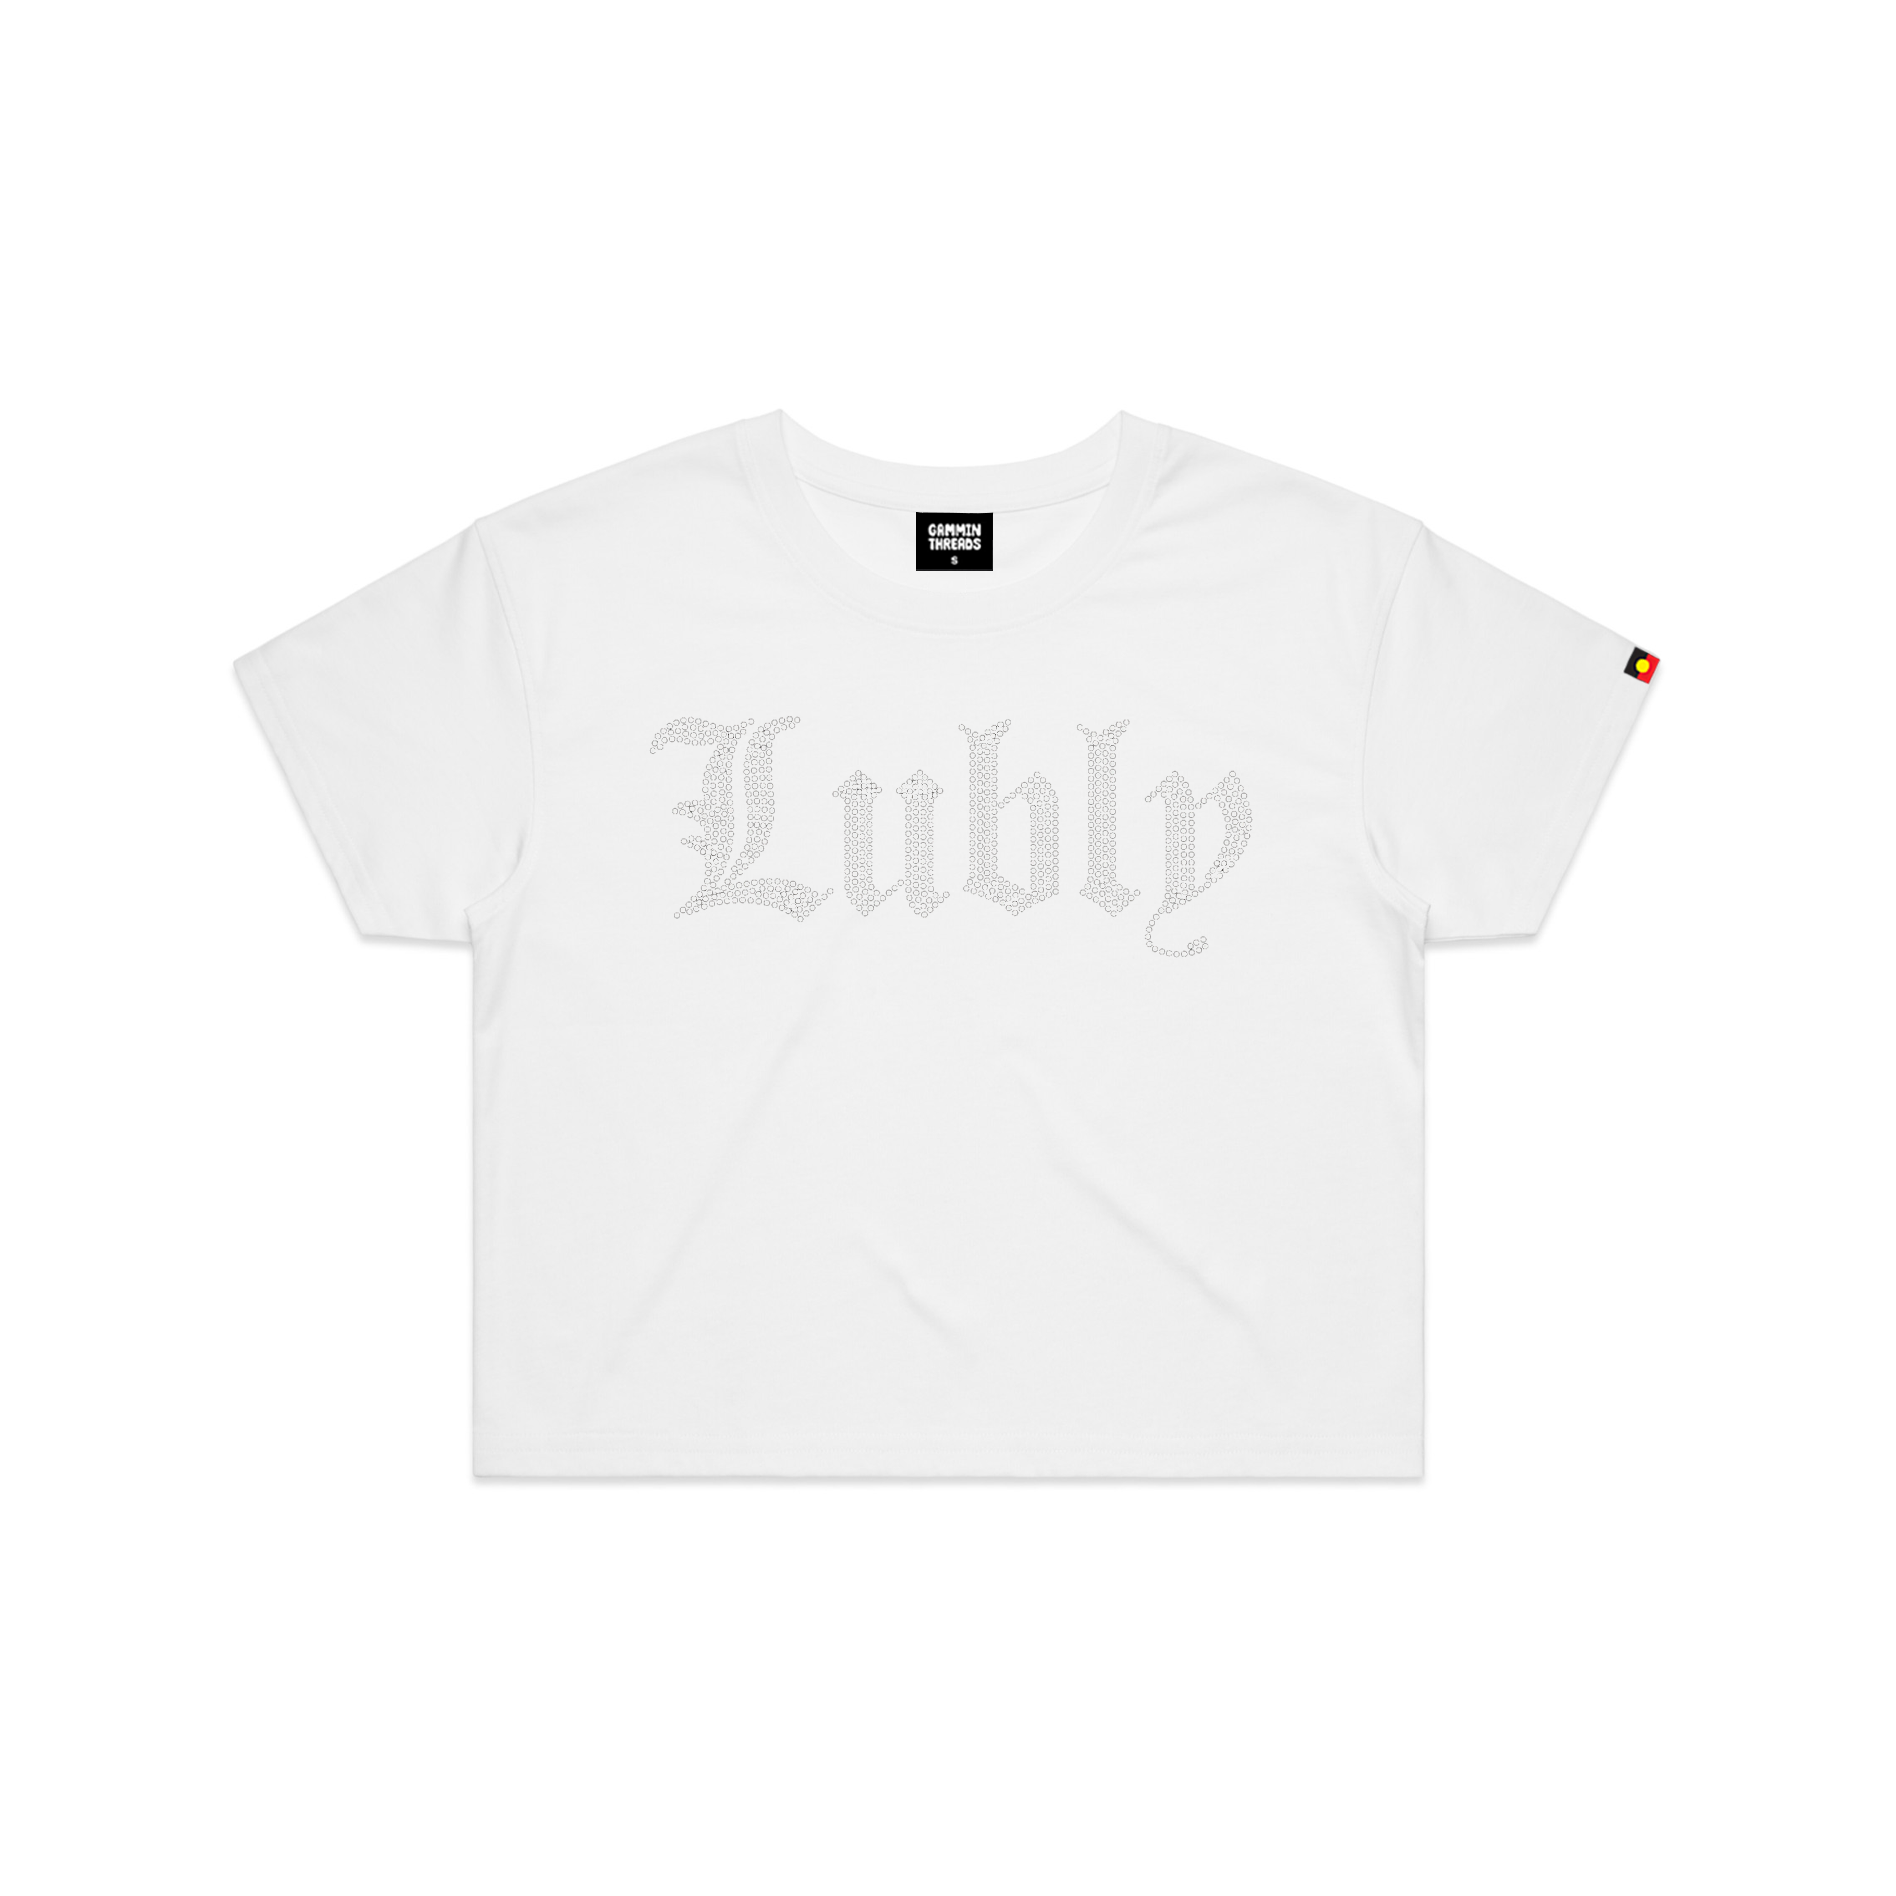 Juicy Lubly crop white